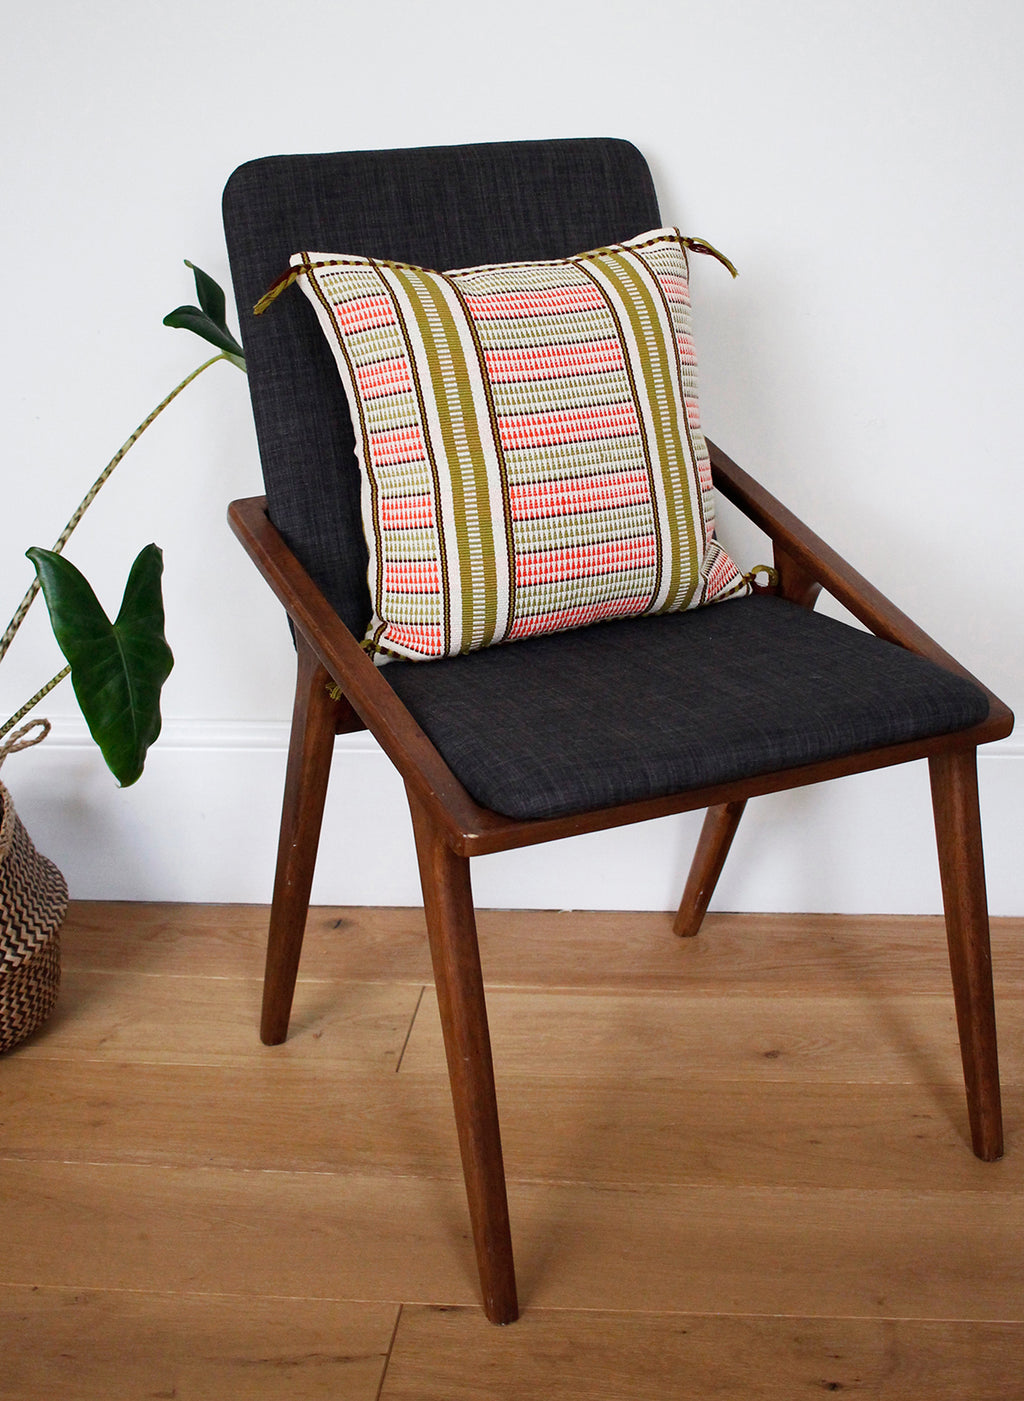 Handwoven cushion with green and coral pattern